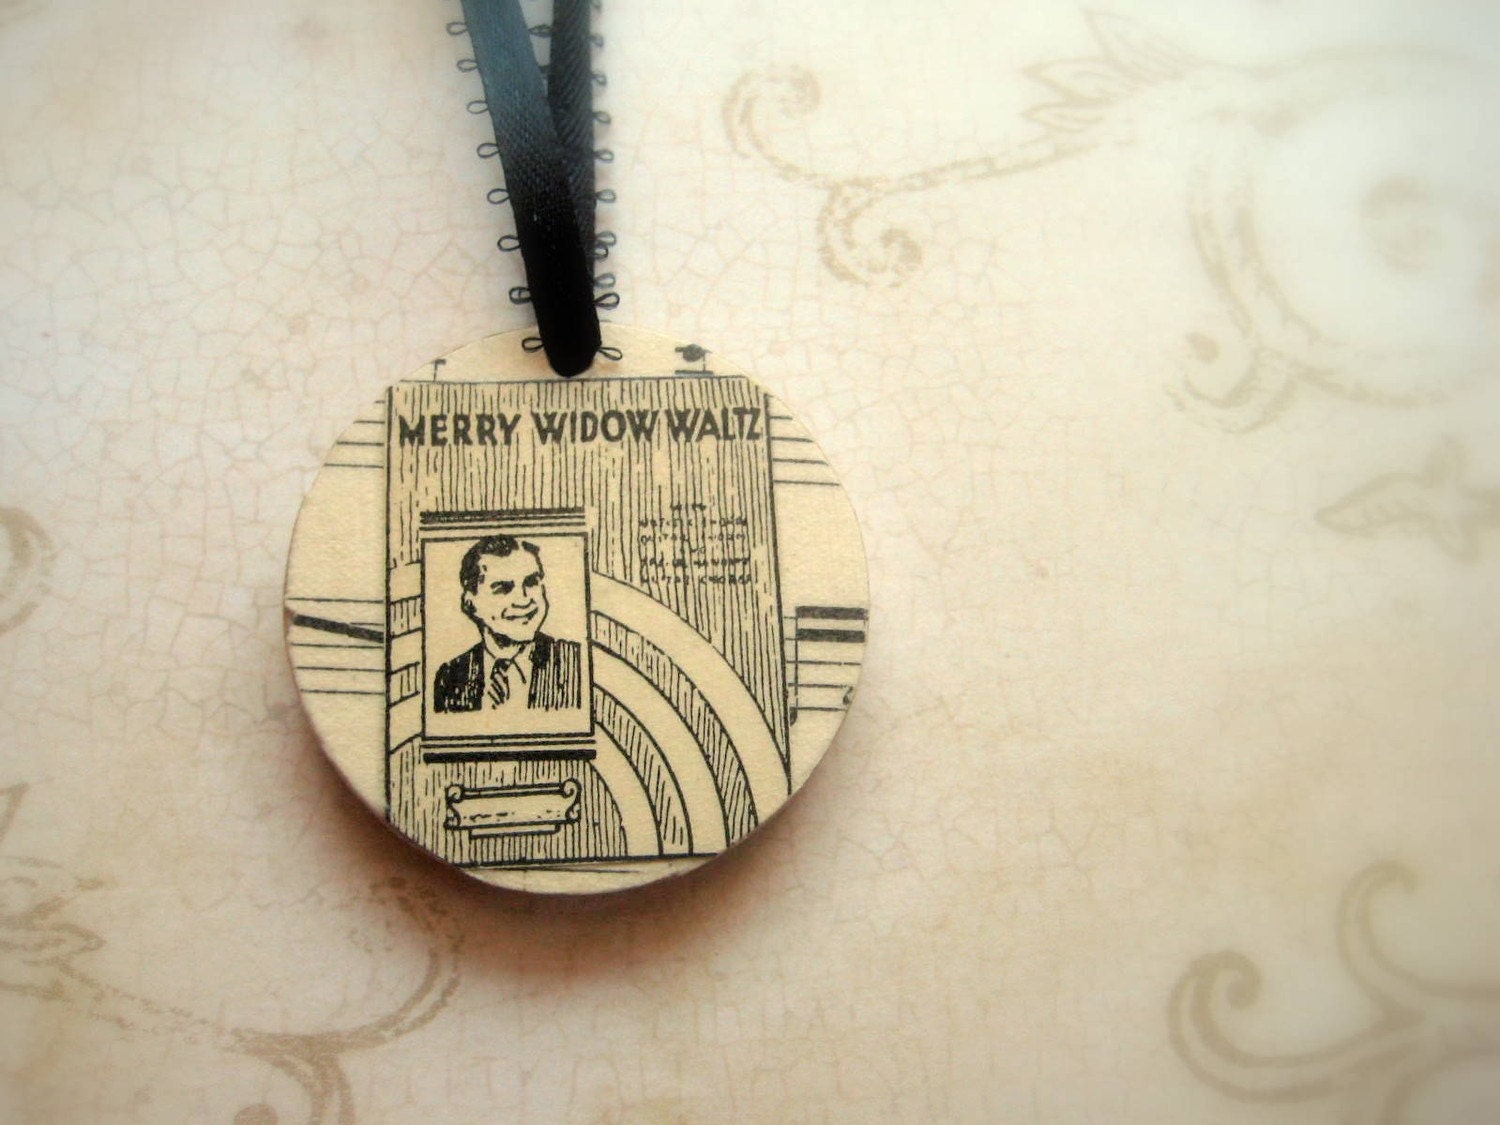 Merry Widow Waltz decoupaged wooden ornnament with vintage sheet music. One of a kind handmade Christmas ornament